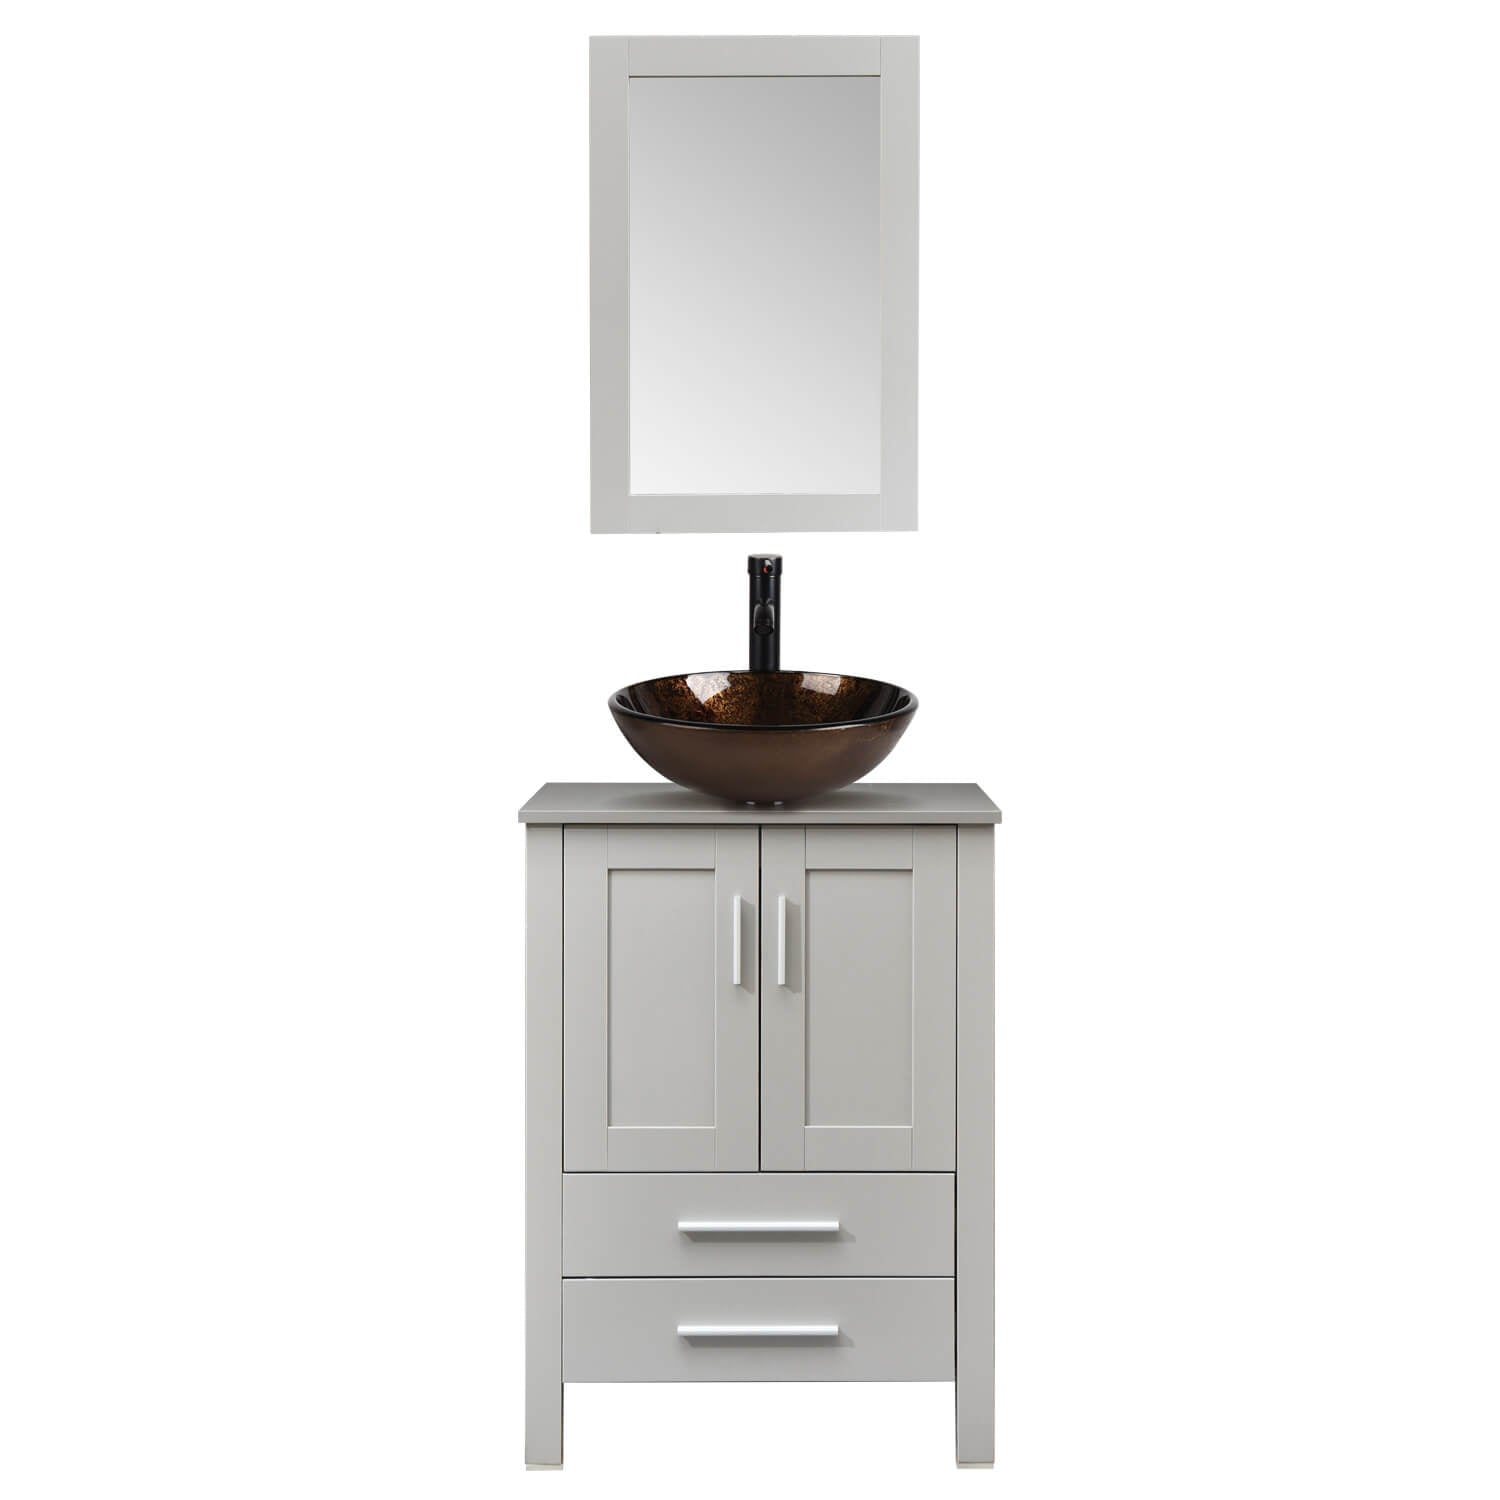 Elecwish gray wood bathroom vanity with brown glass sink BA20062 in white background